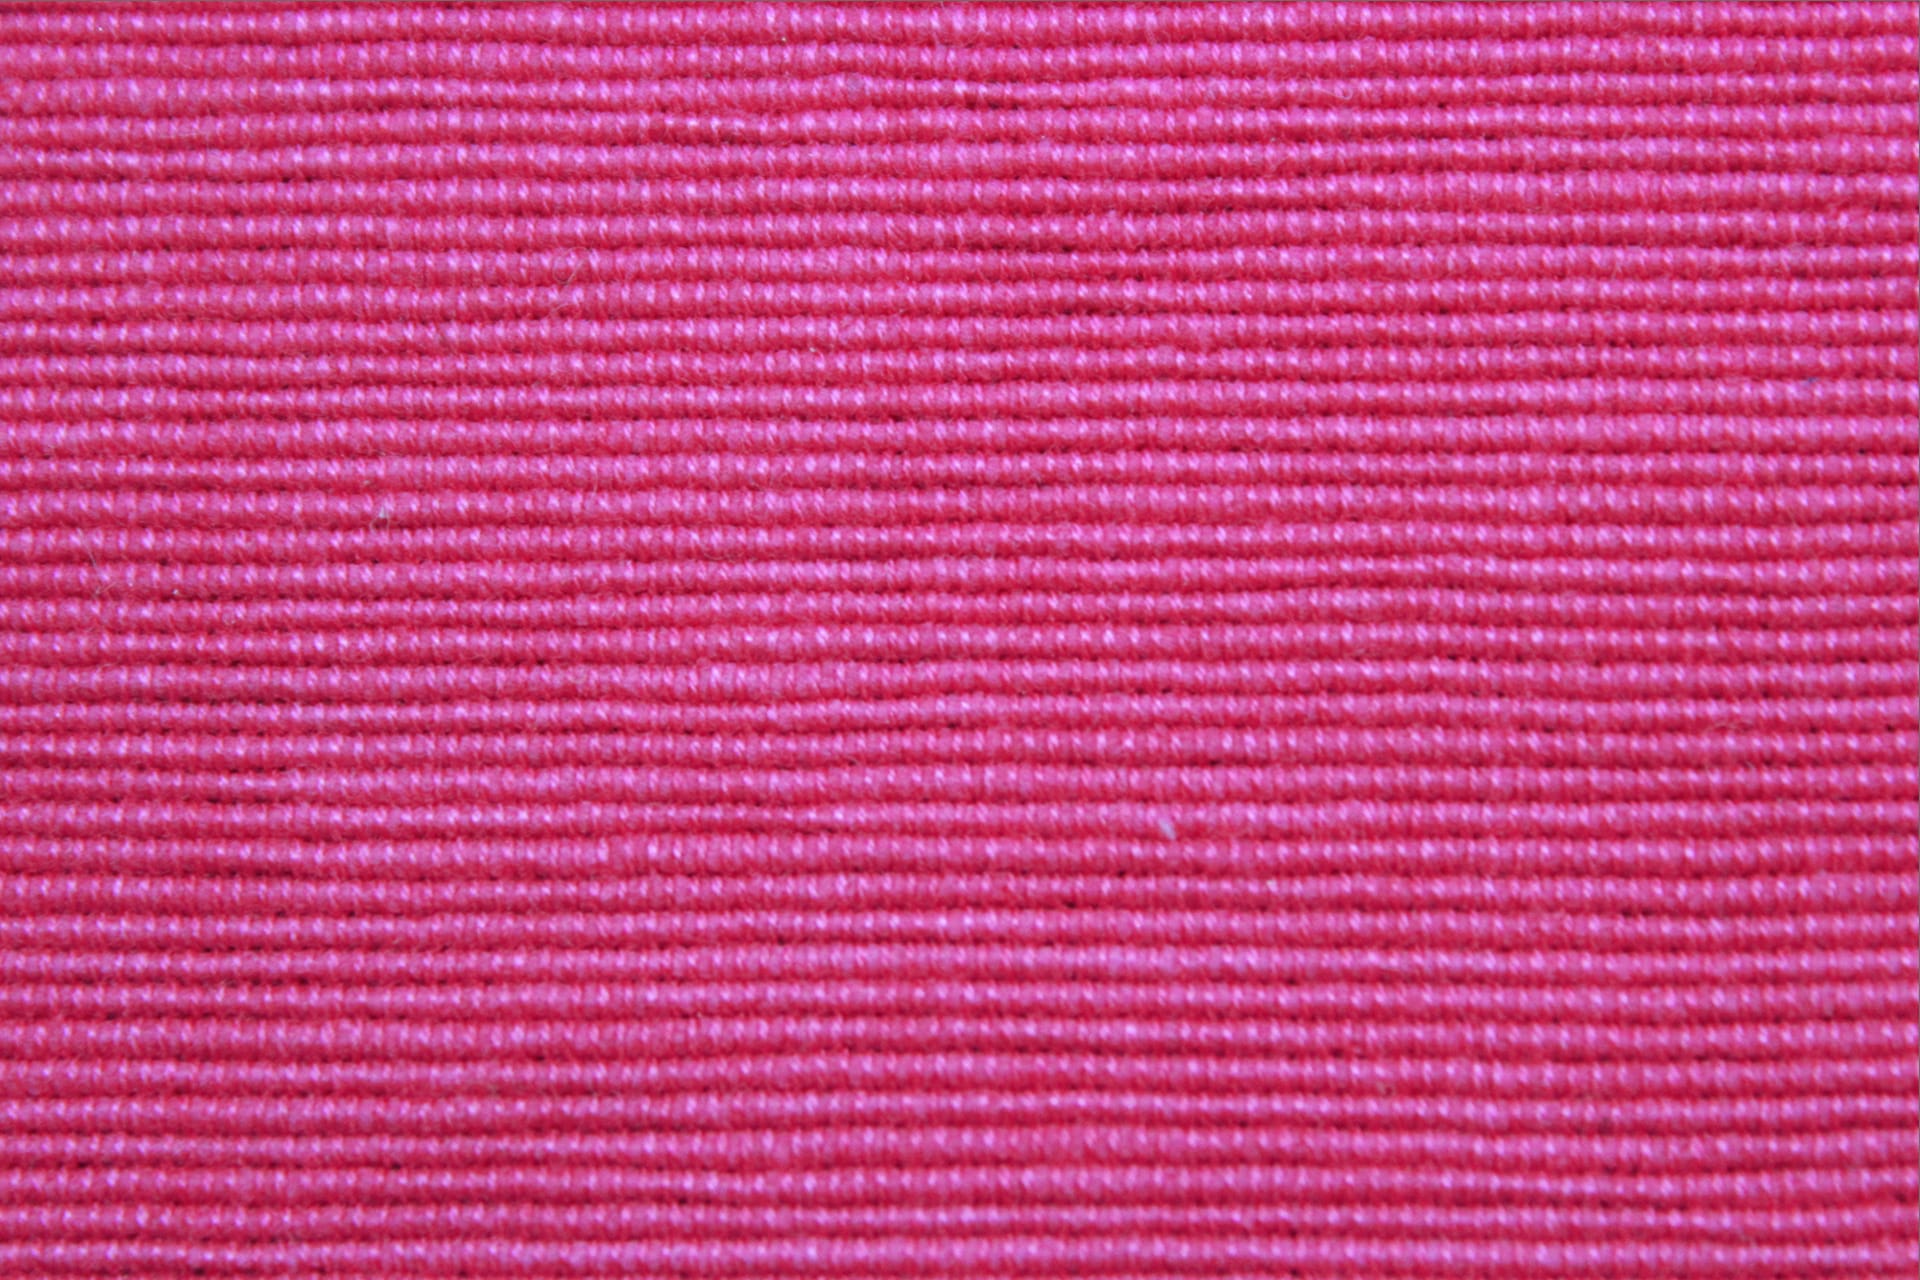 Pink Handloom Corded Weave 330 GSM Plain Cotton Fabric (122 cms) online in India